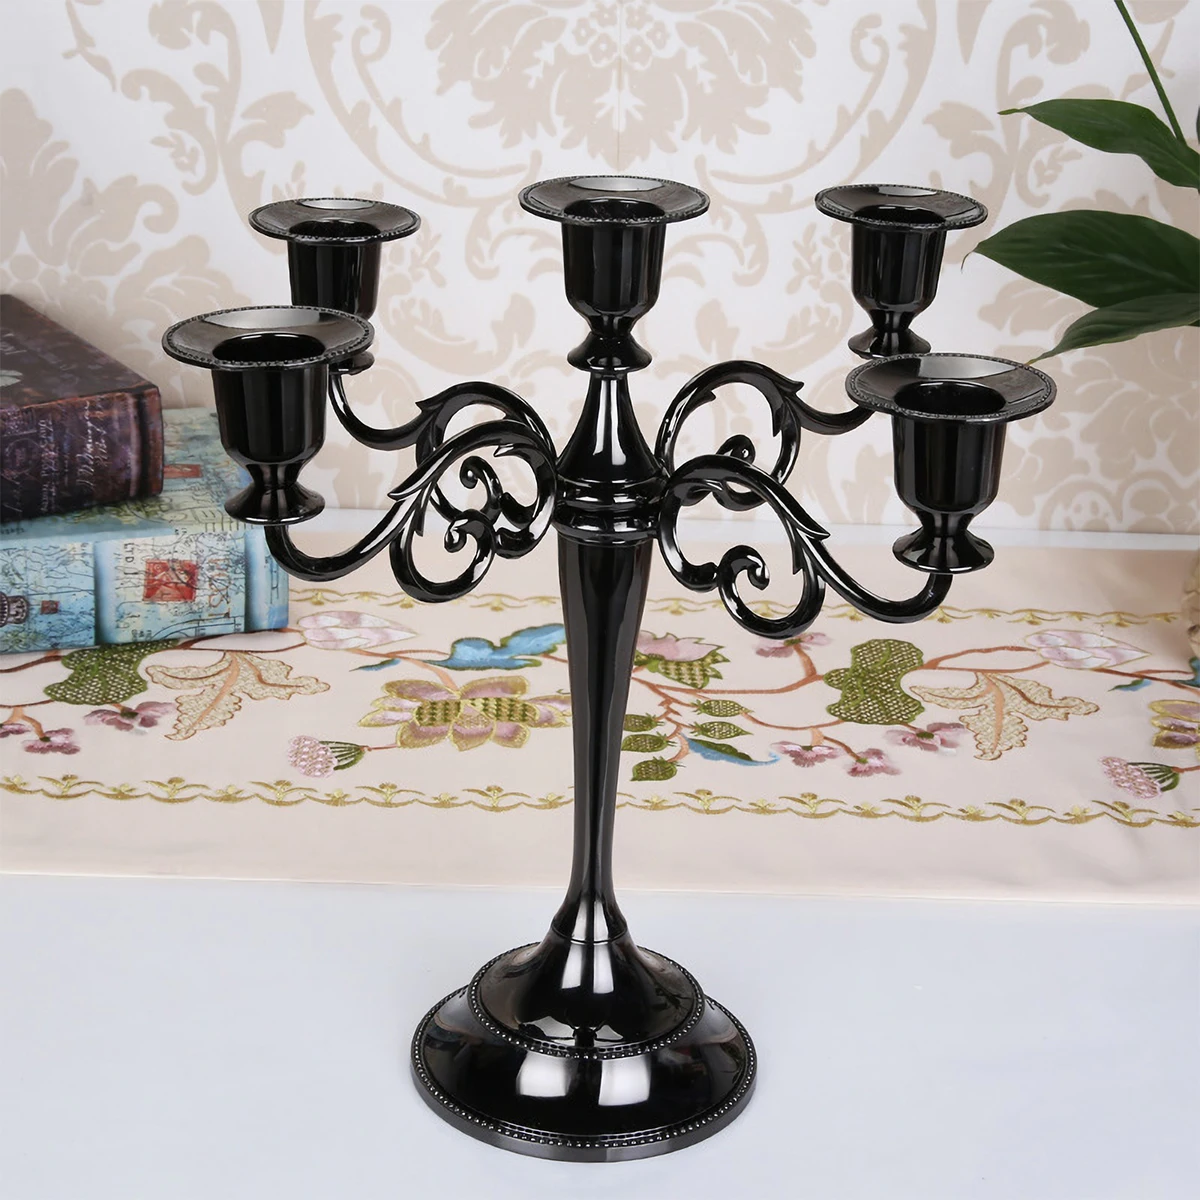 

Nordic Style Bronze Candle Holder 5 Arm Candelabra Wedding Table Centerpieces Candlesticks metal Home Decoration, Gold,silver,black,copper